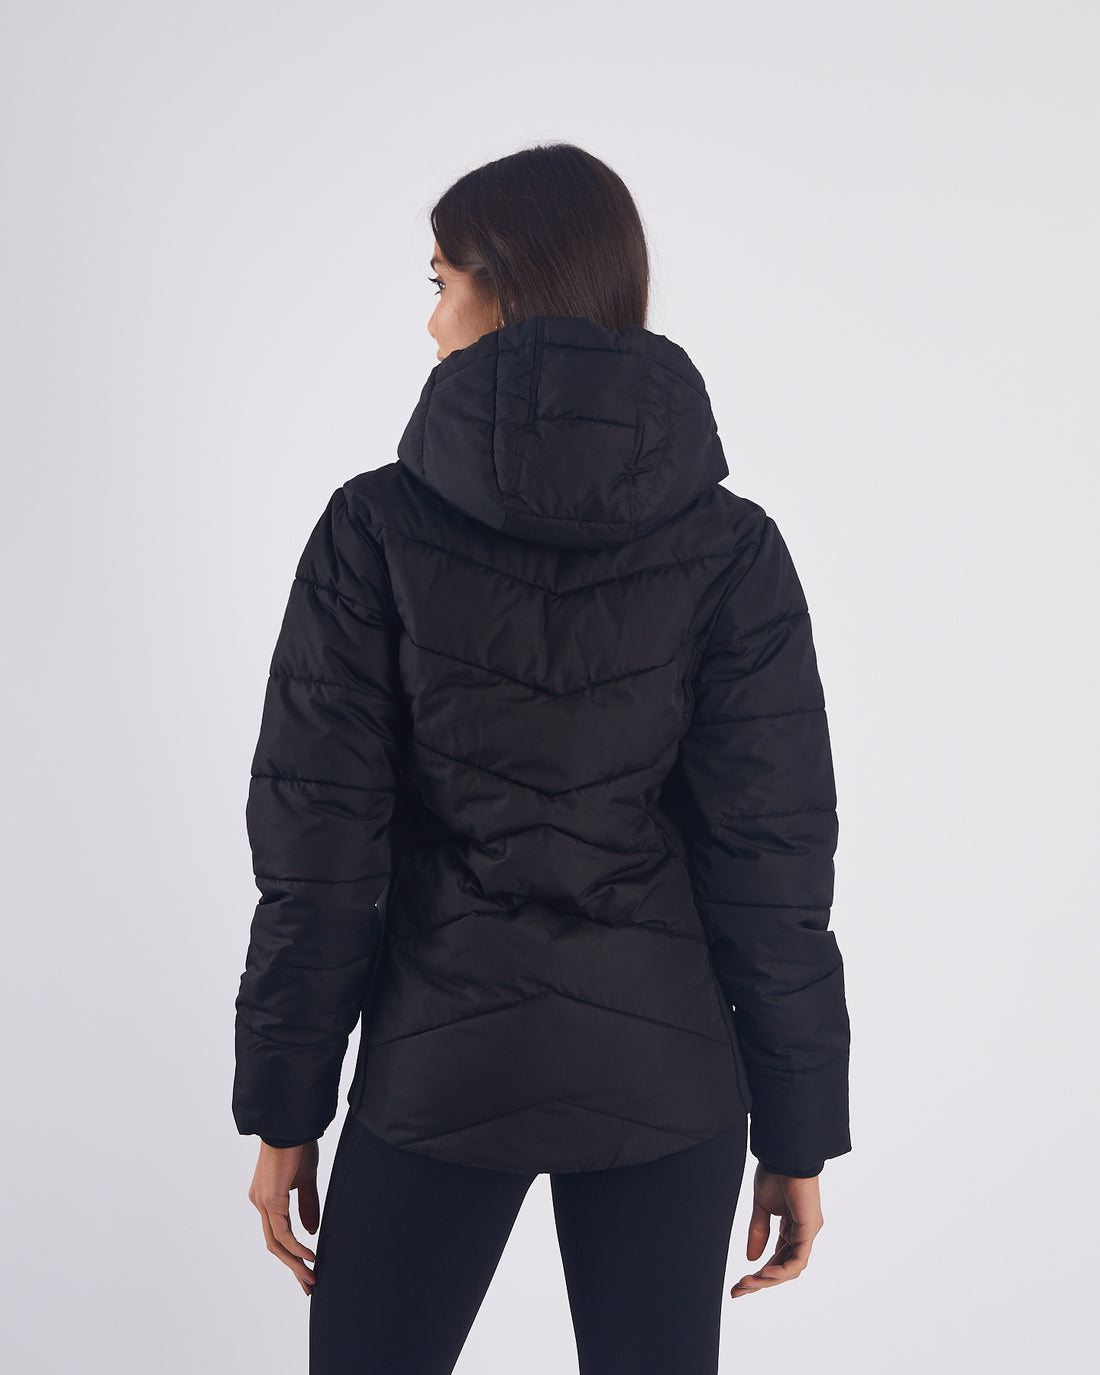 Carrie Black Jacket-Back view